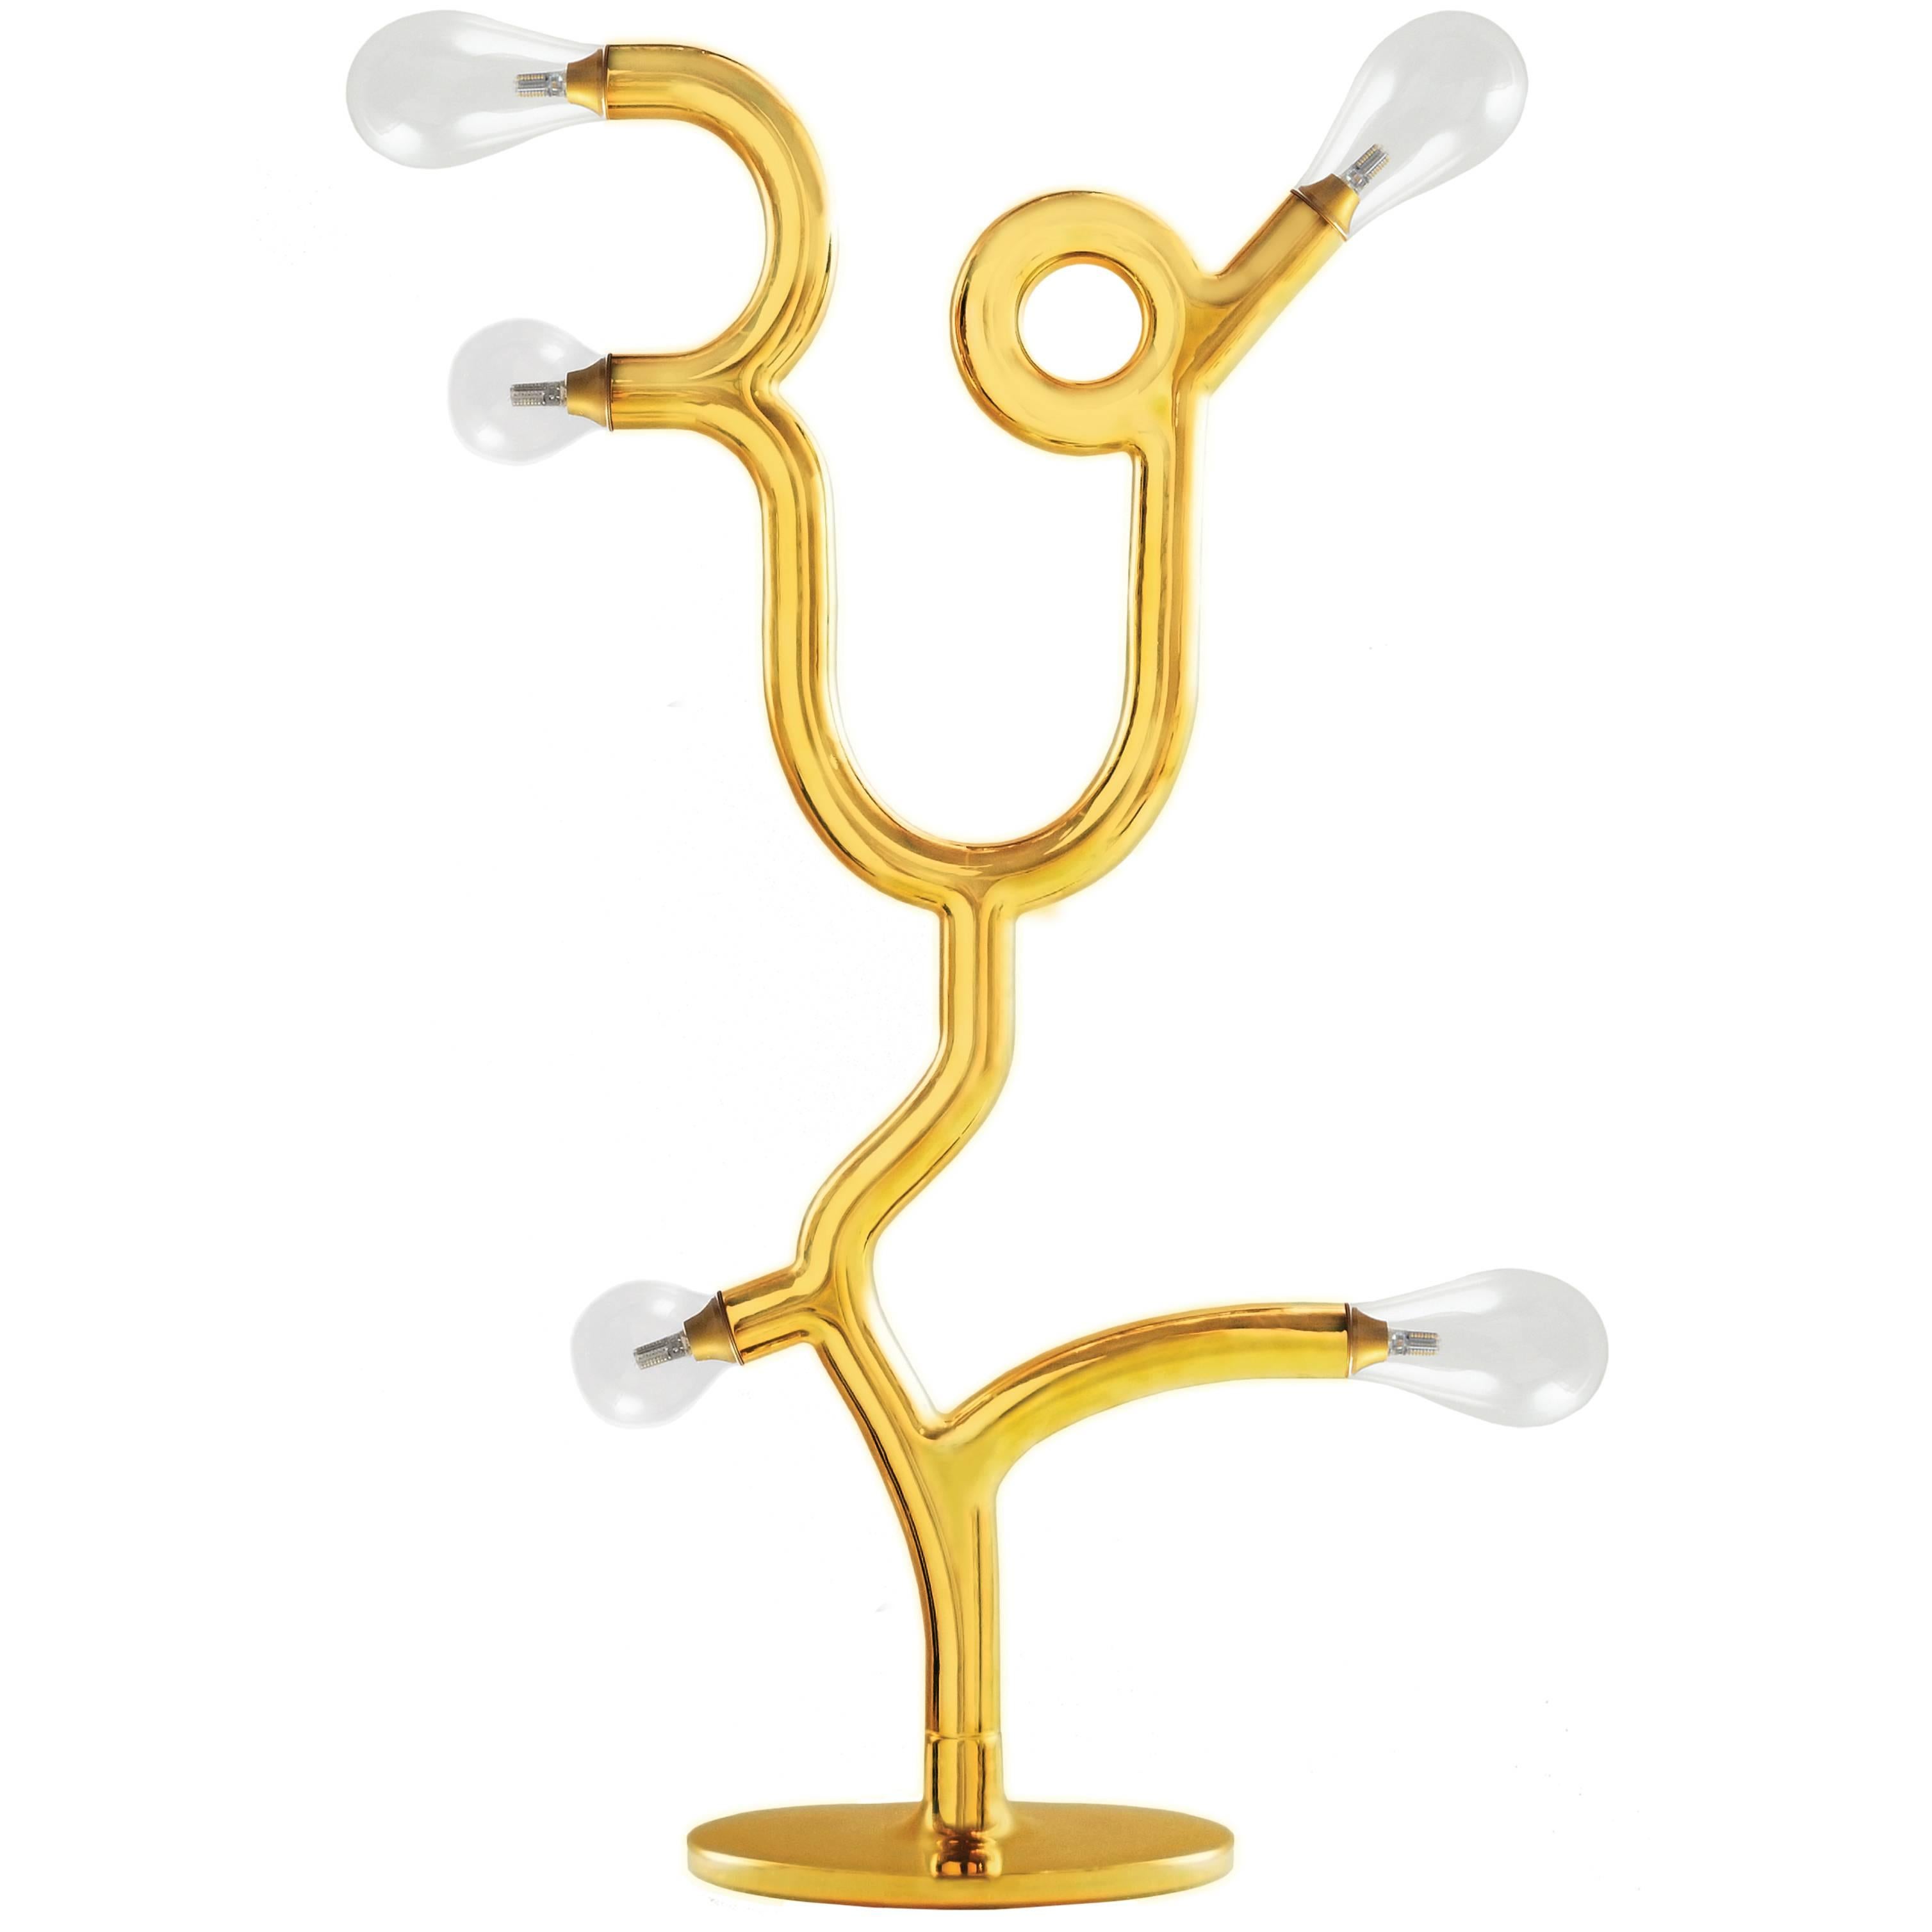 Five Bulb Floor Lamp in Ceramic with 24-karat gold finish and Handblown glass For Sale